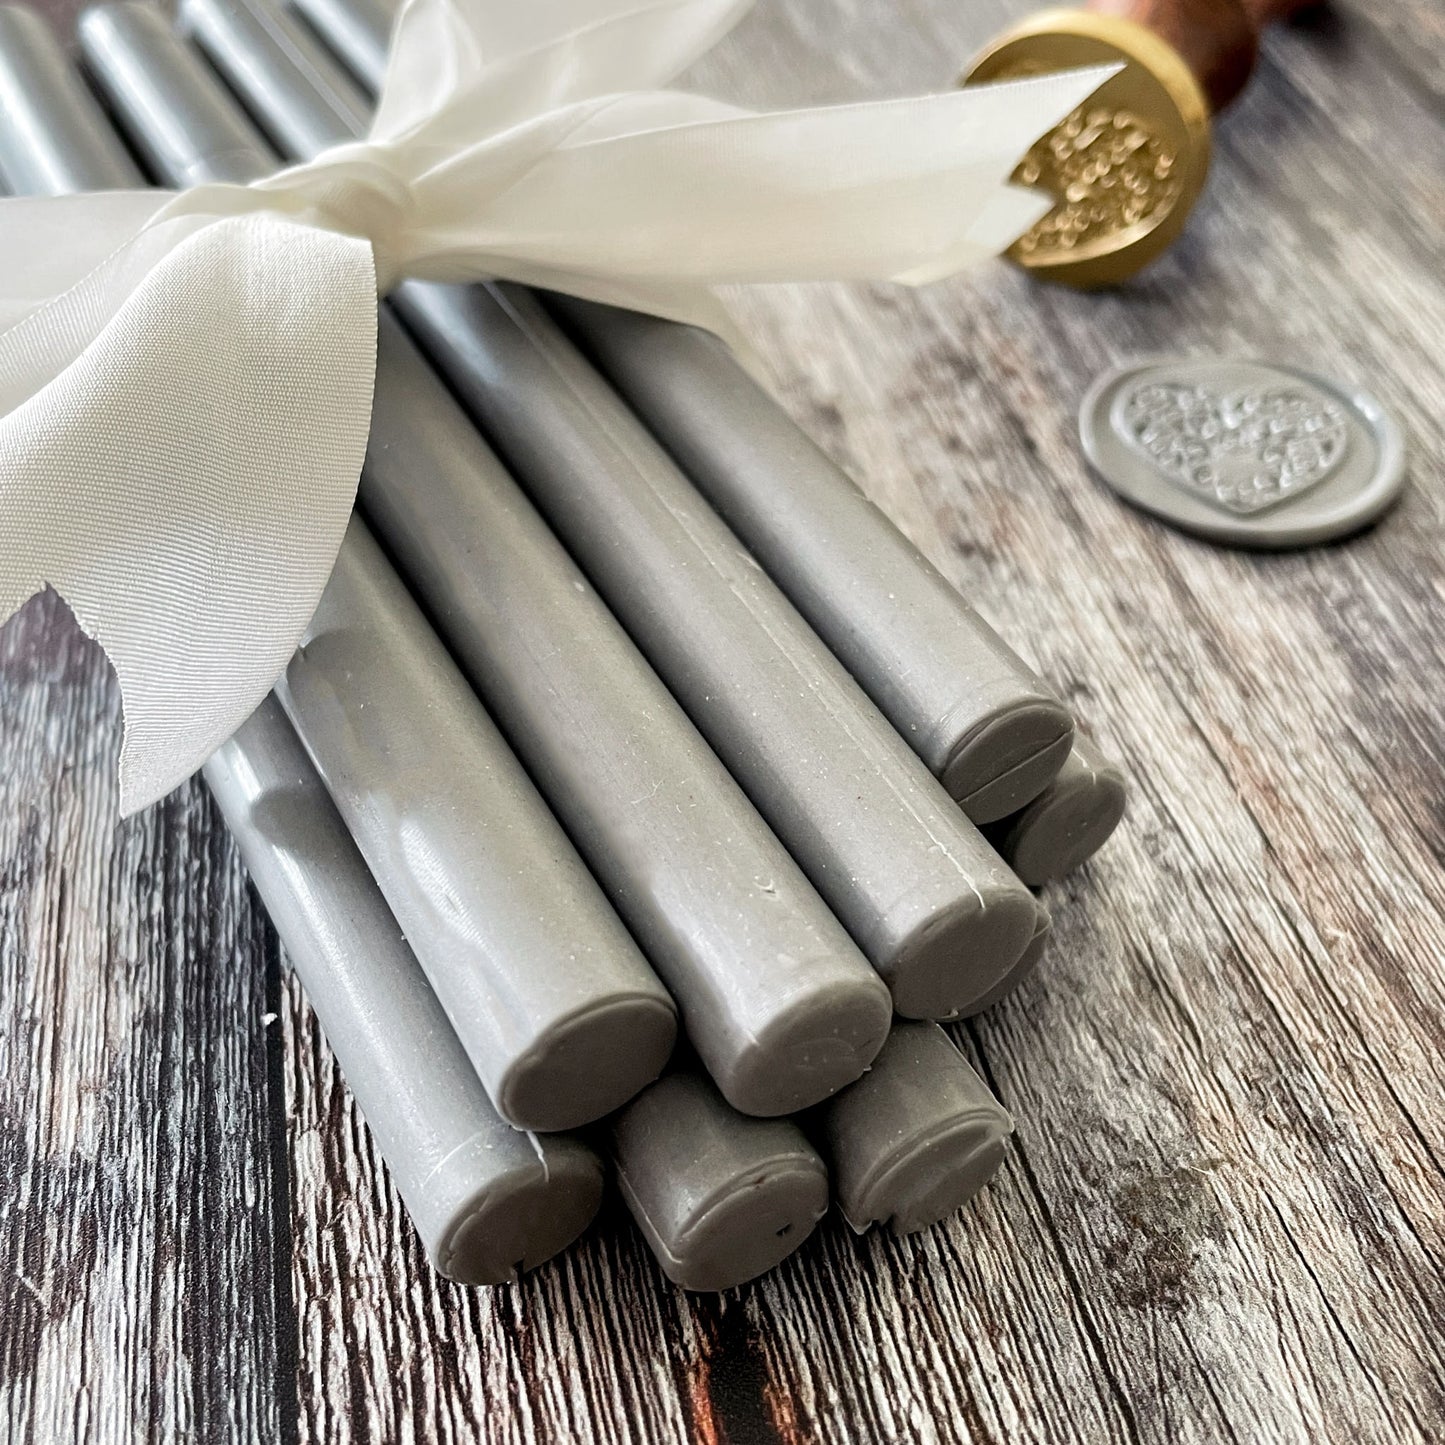 Grey sealing wax sticks By The Natural Paper Company.  Eco friendly sealing wax sticks.  11mm wide.  Can be used with a glue gun or melting spoon.  Plastic free, paraffin free and biodegradable.  By The Natural Paper Company